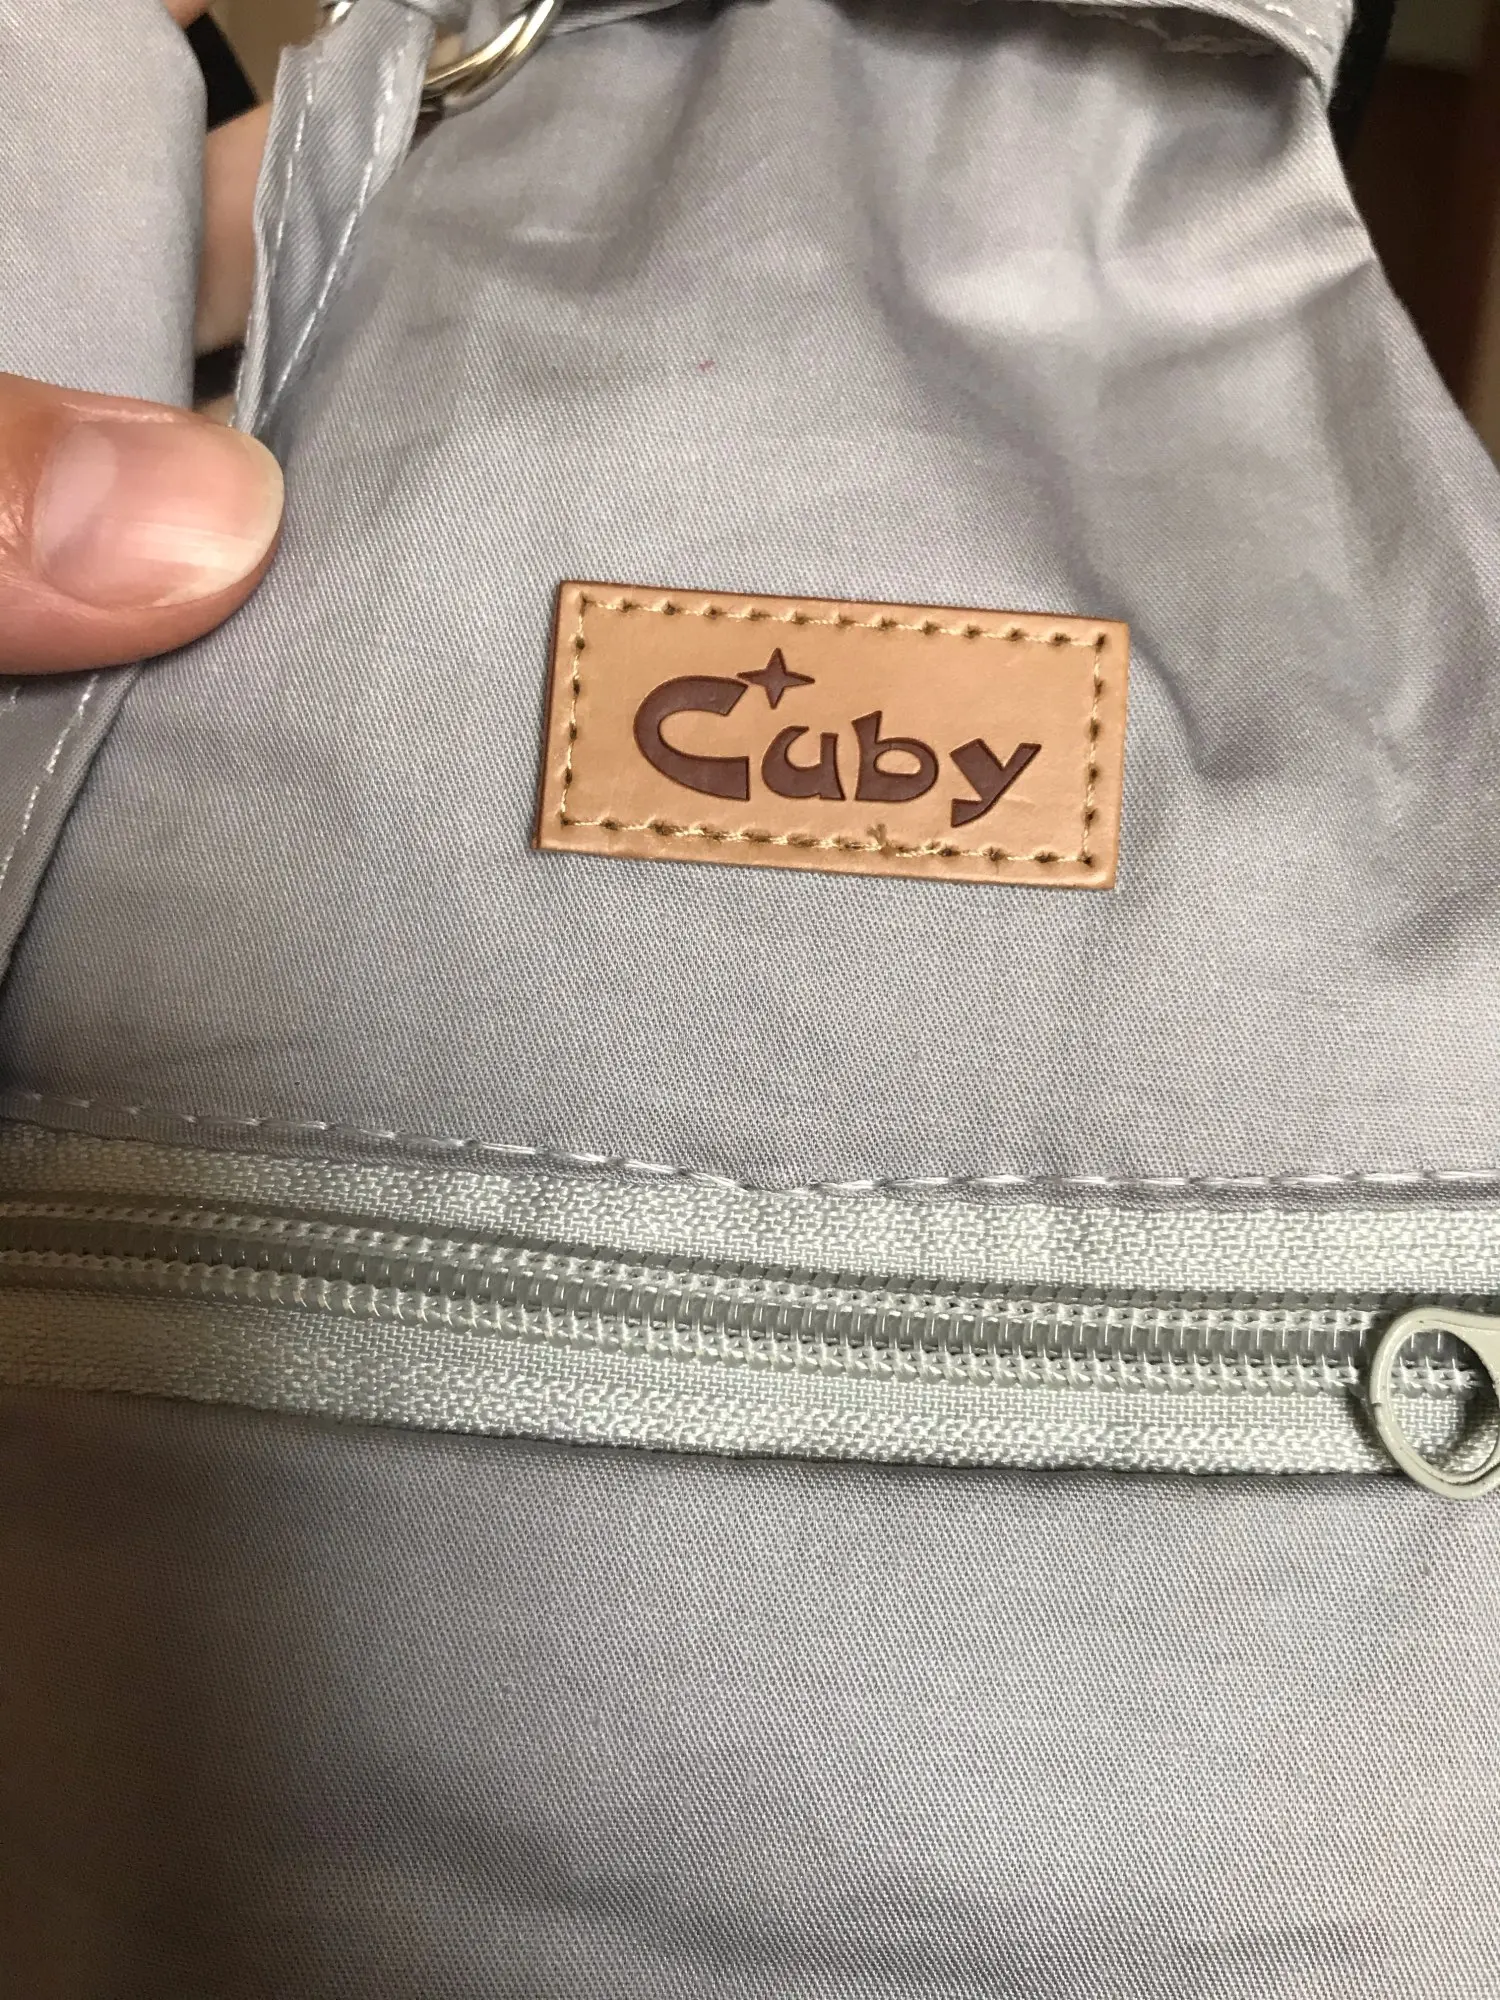 CUBY Dog Bag transport Carrier photo review